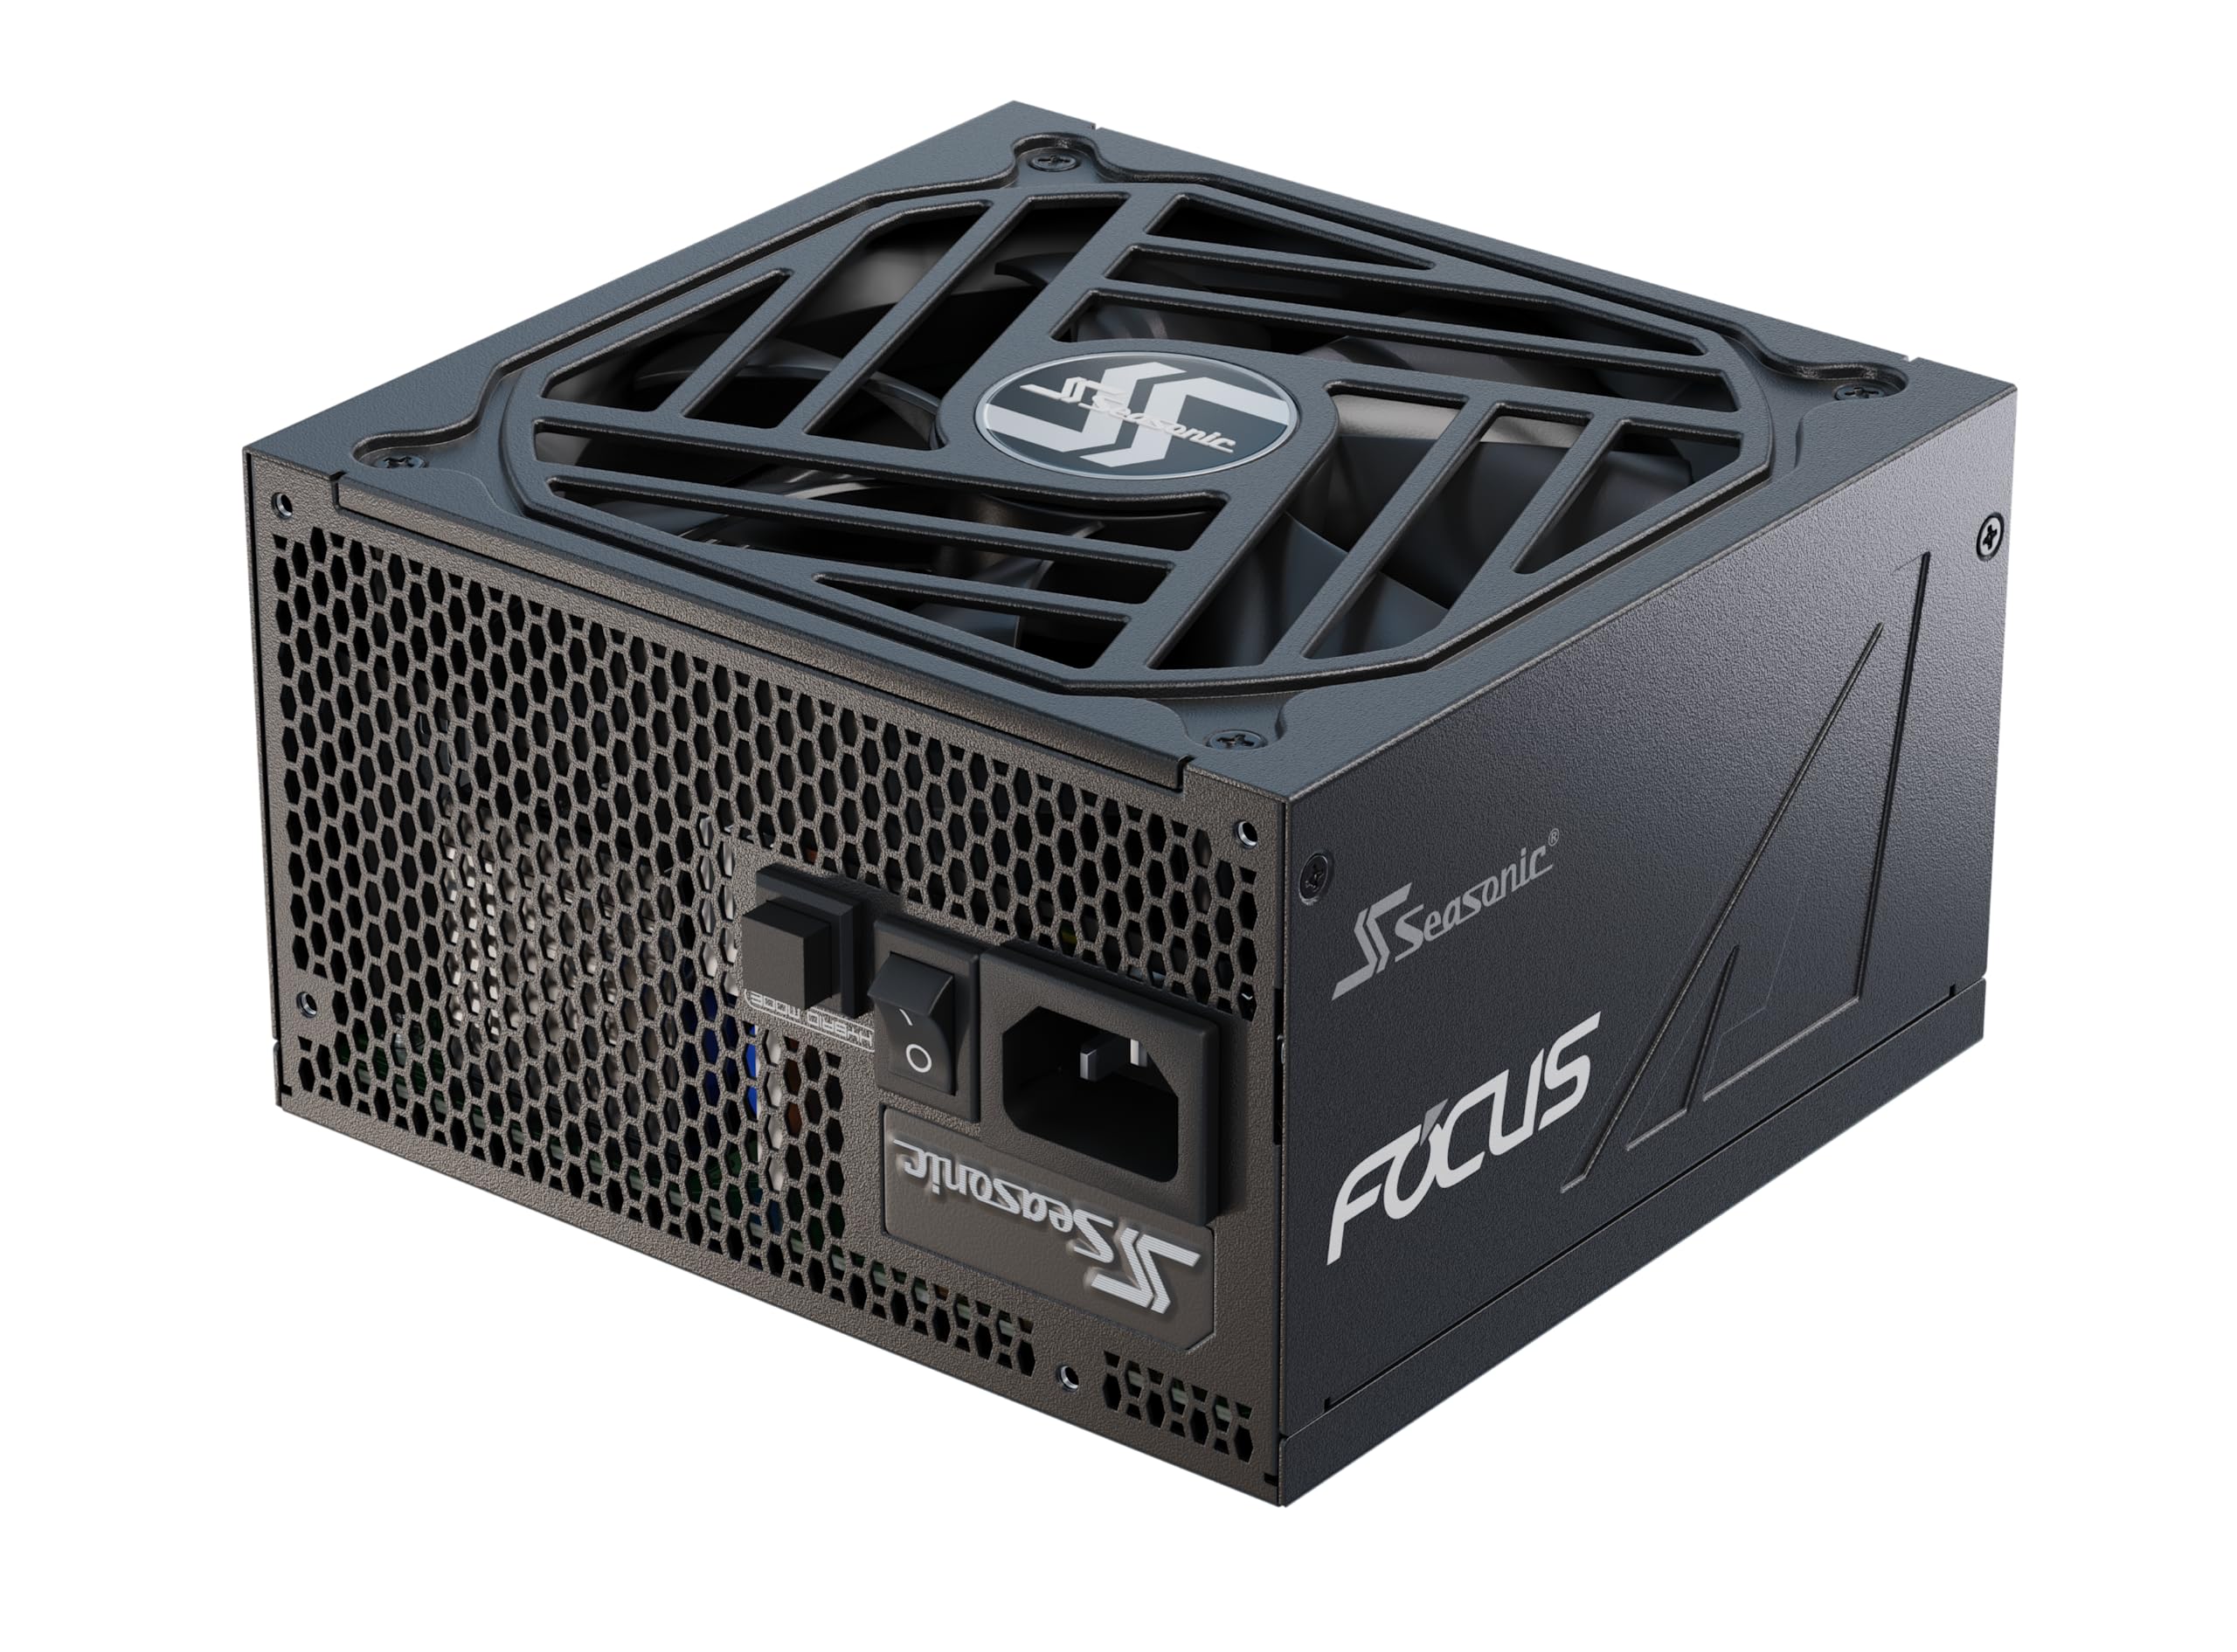 Seasonic Focus V3 GX-850, 850W 80+ Gold, Full-Modular, Fan Control in Fanless, Silent, and Cooling Mode, 10 Year Warranty, Perfect Power Supply for Gaming and Various Application, SSR-850FX3.